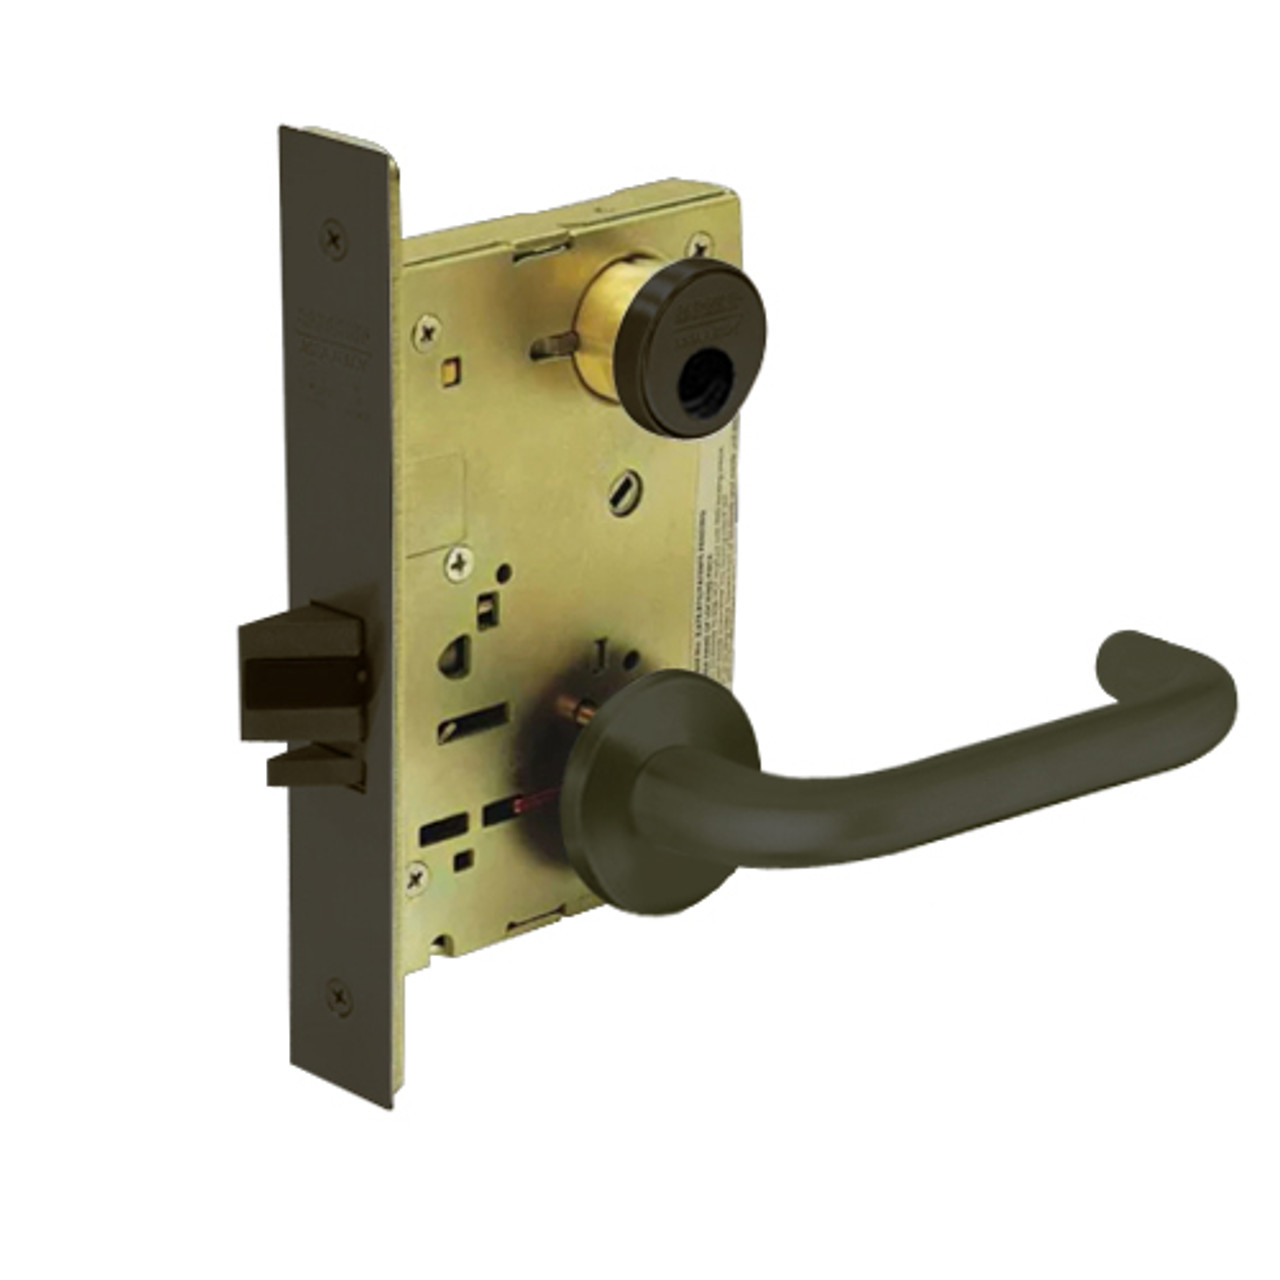 LC-8255-LNJ-10B Sargent 8200 Series Office or Entry Mortise Lock with LNJ Lever Trim Less Cylinder in Oxidized Dull Bronze